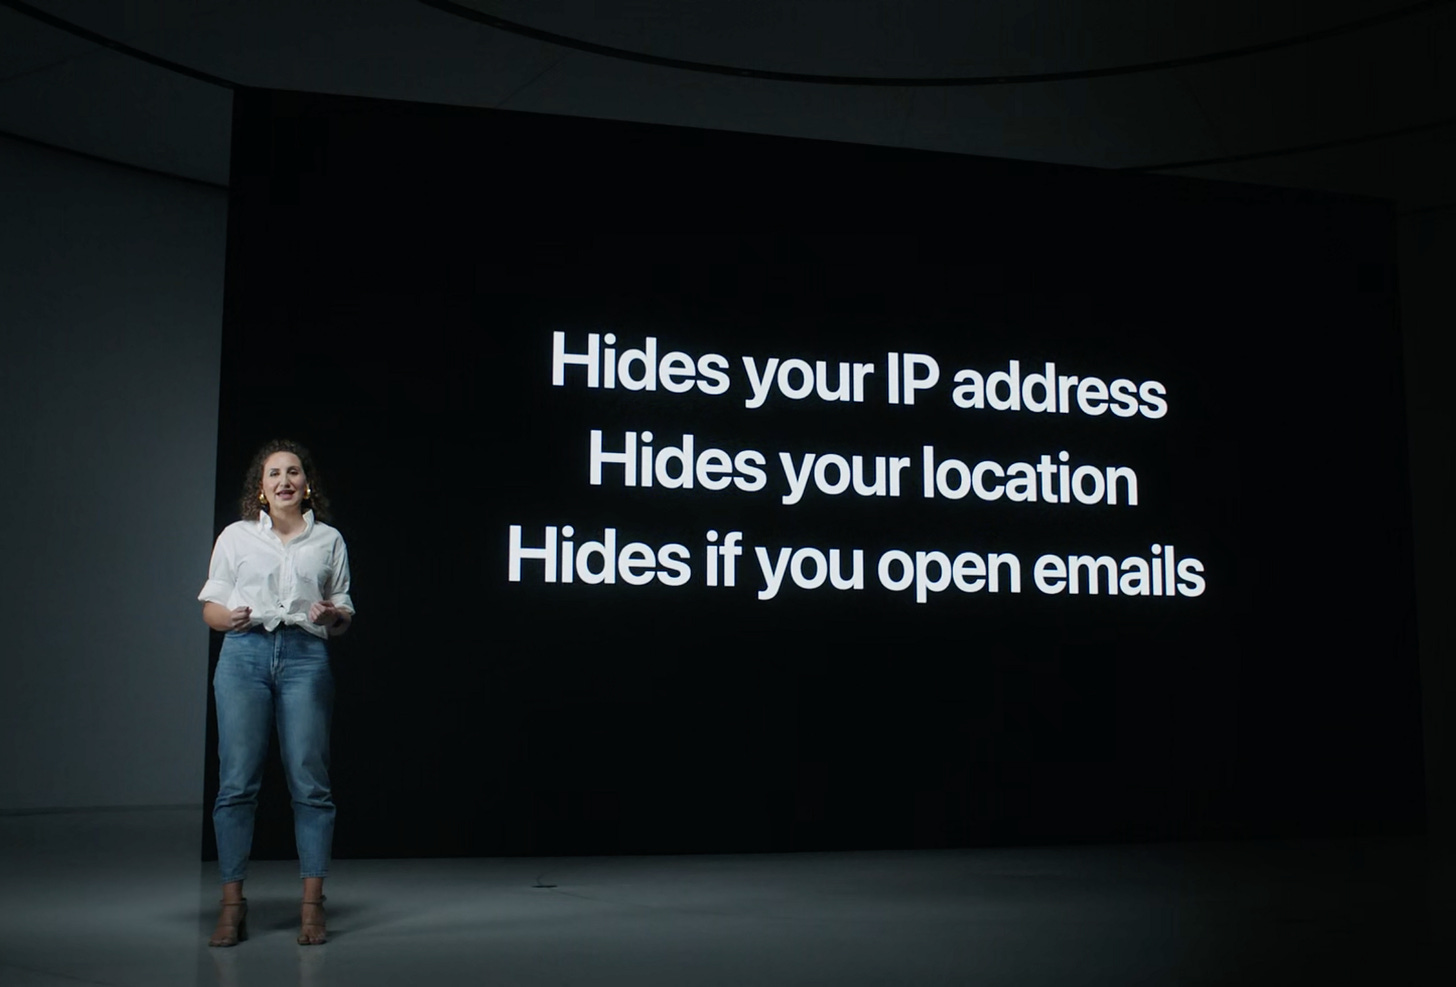 WWDC 2021 keynote: hide your ip address, location and open email activity